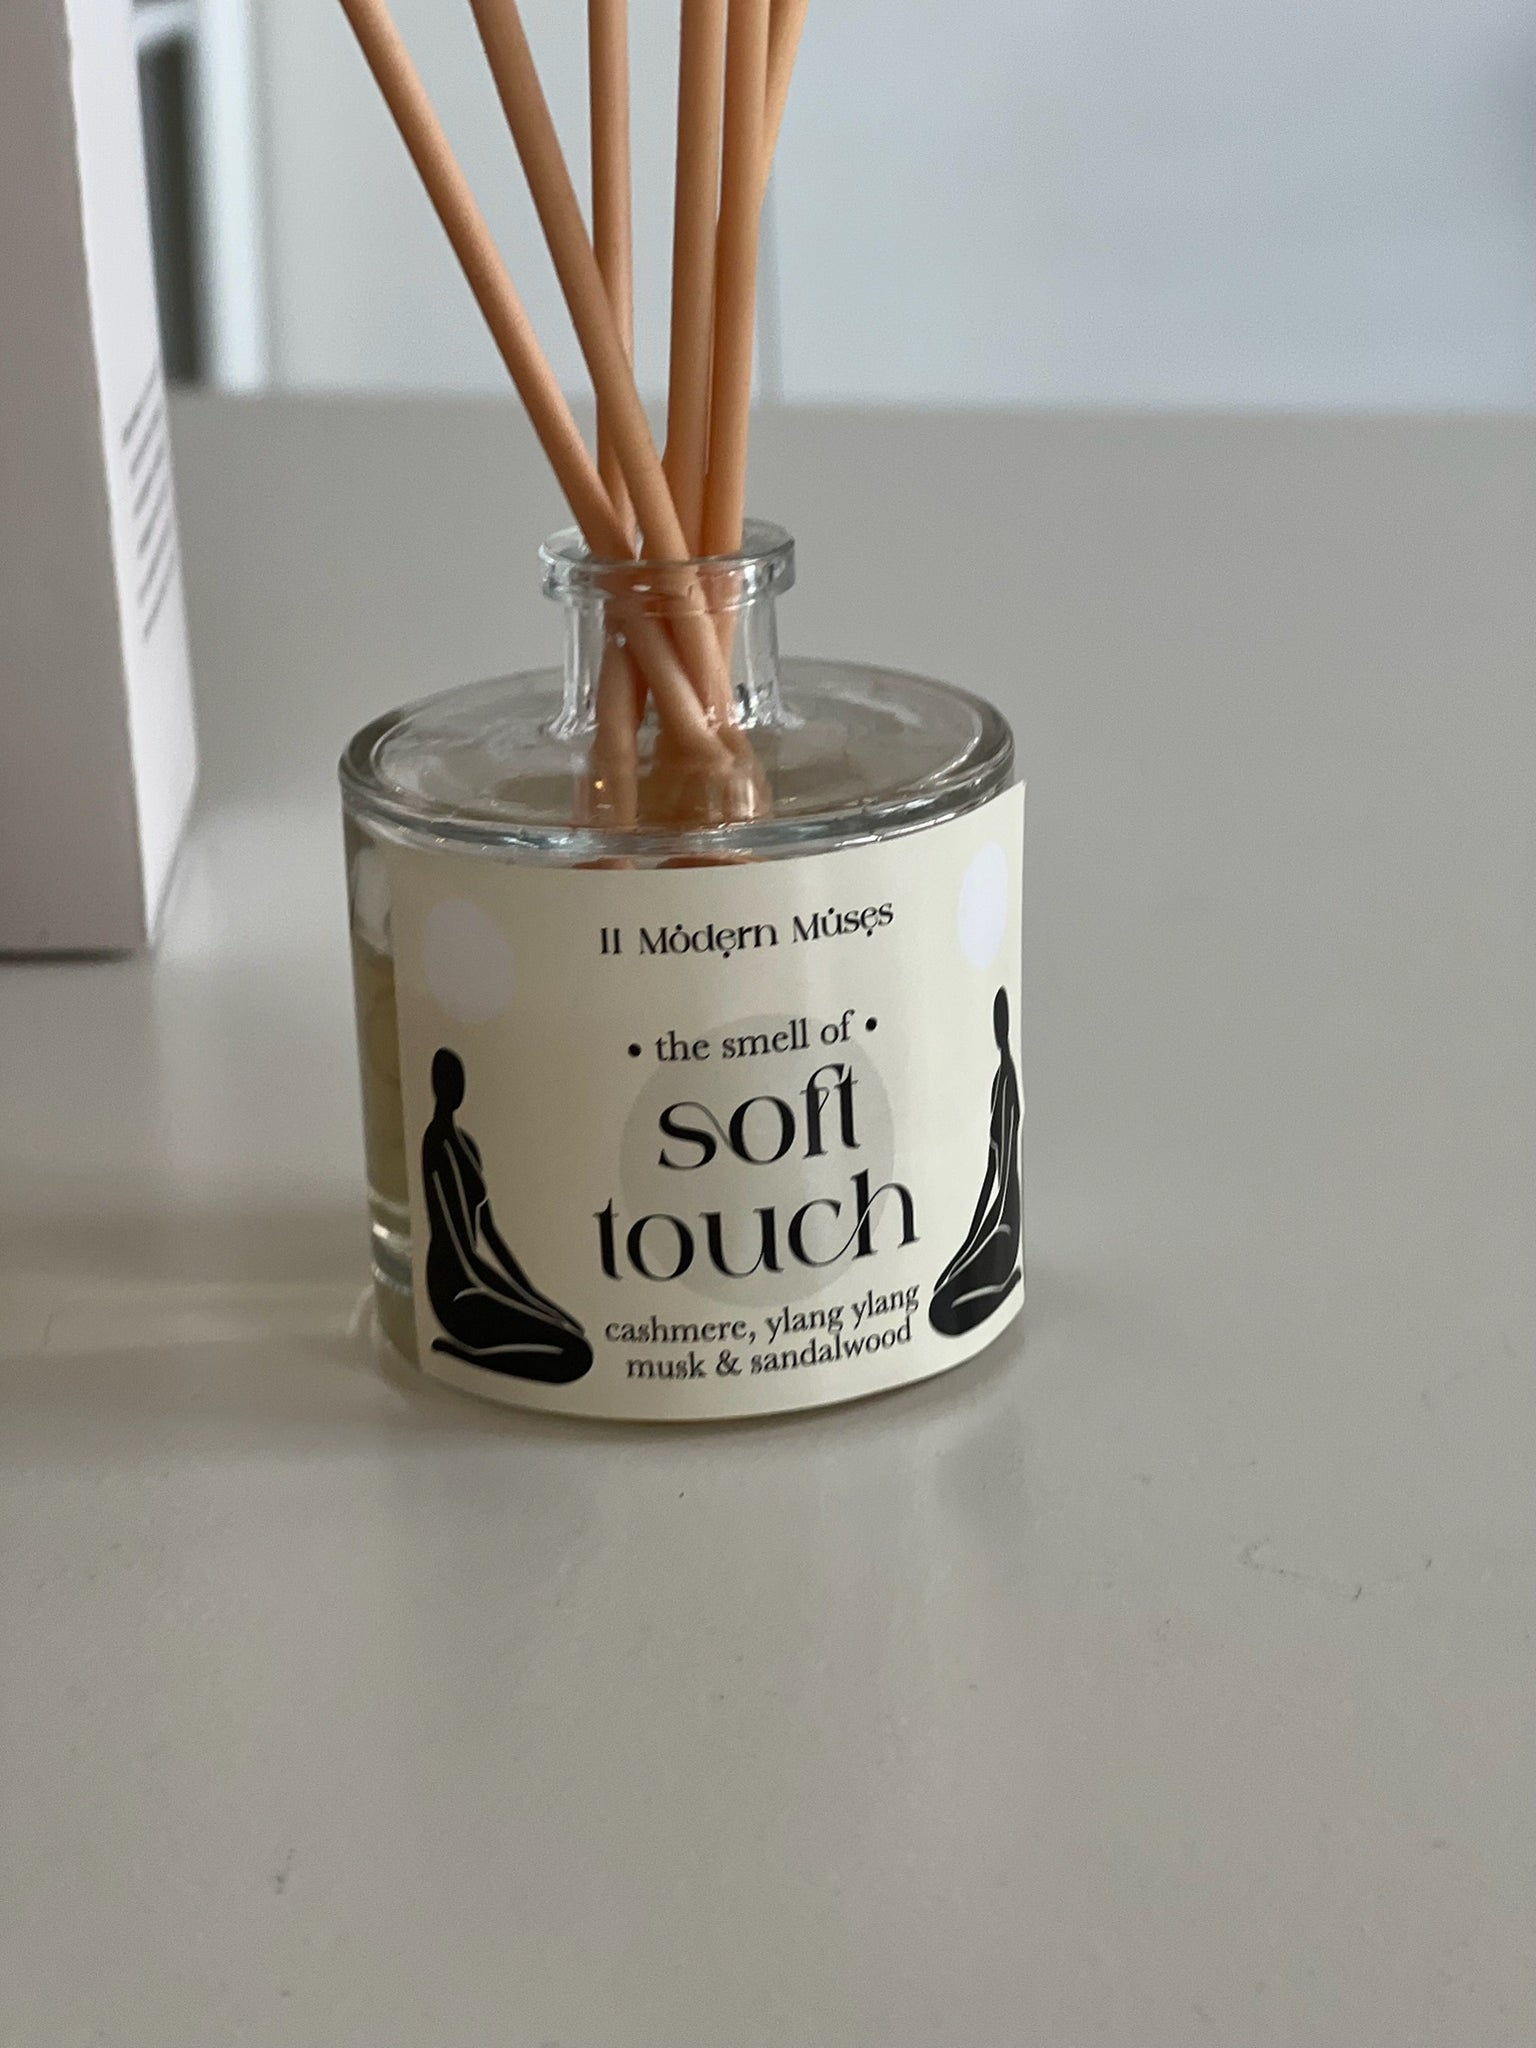 THE SMELL OF SOFT TOUCH - CASHMERE, YLANG-YLANG, MUSK, AND CREAMY SANDALWOOD